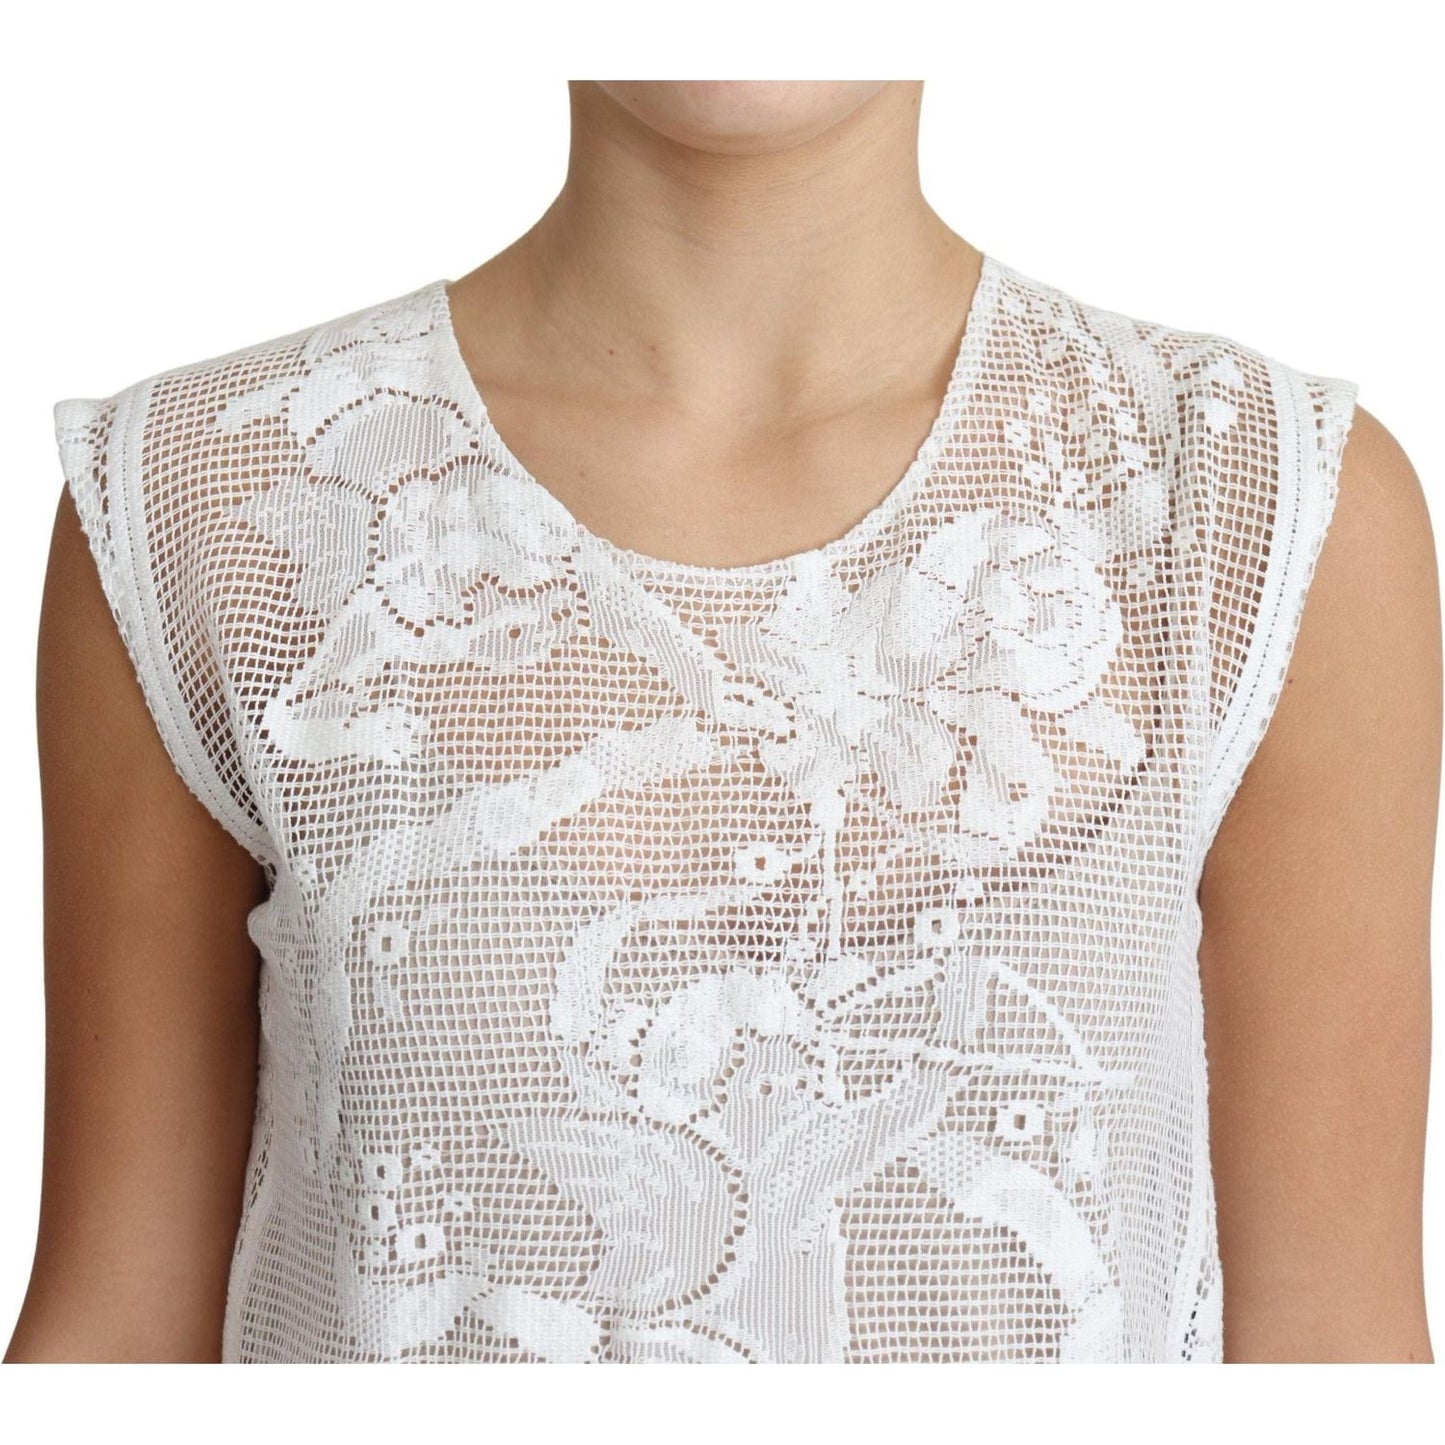 Dolce & Gabbana Chic Lace Floral Sleeveless Top white-cotton-lace-floral-angel-motif-tank-top